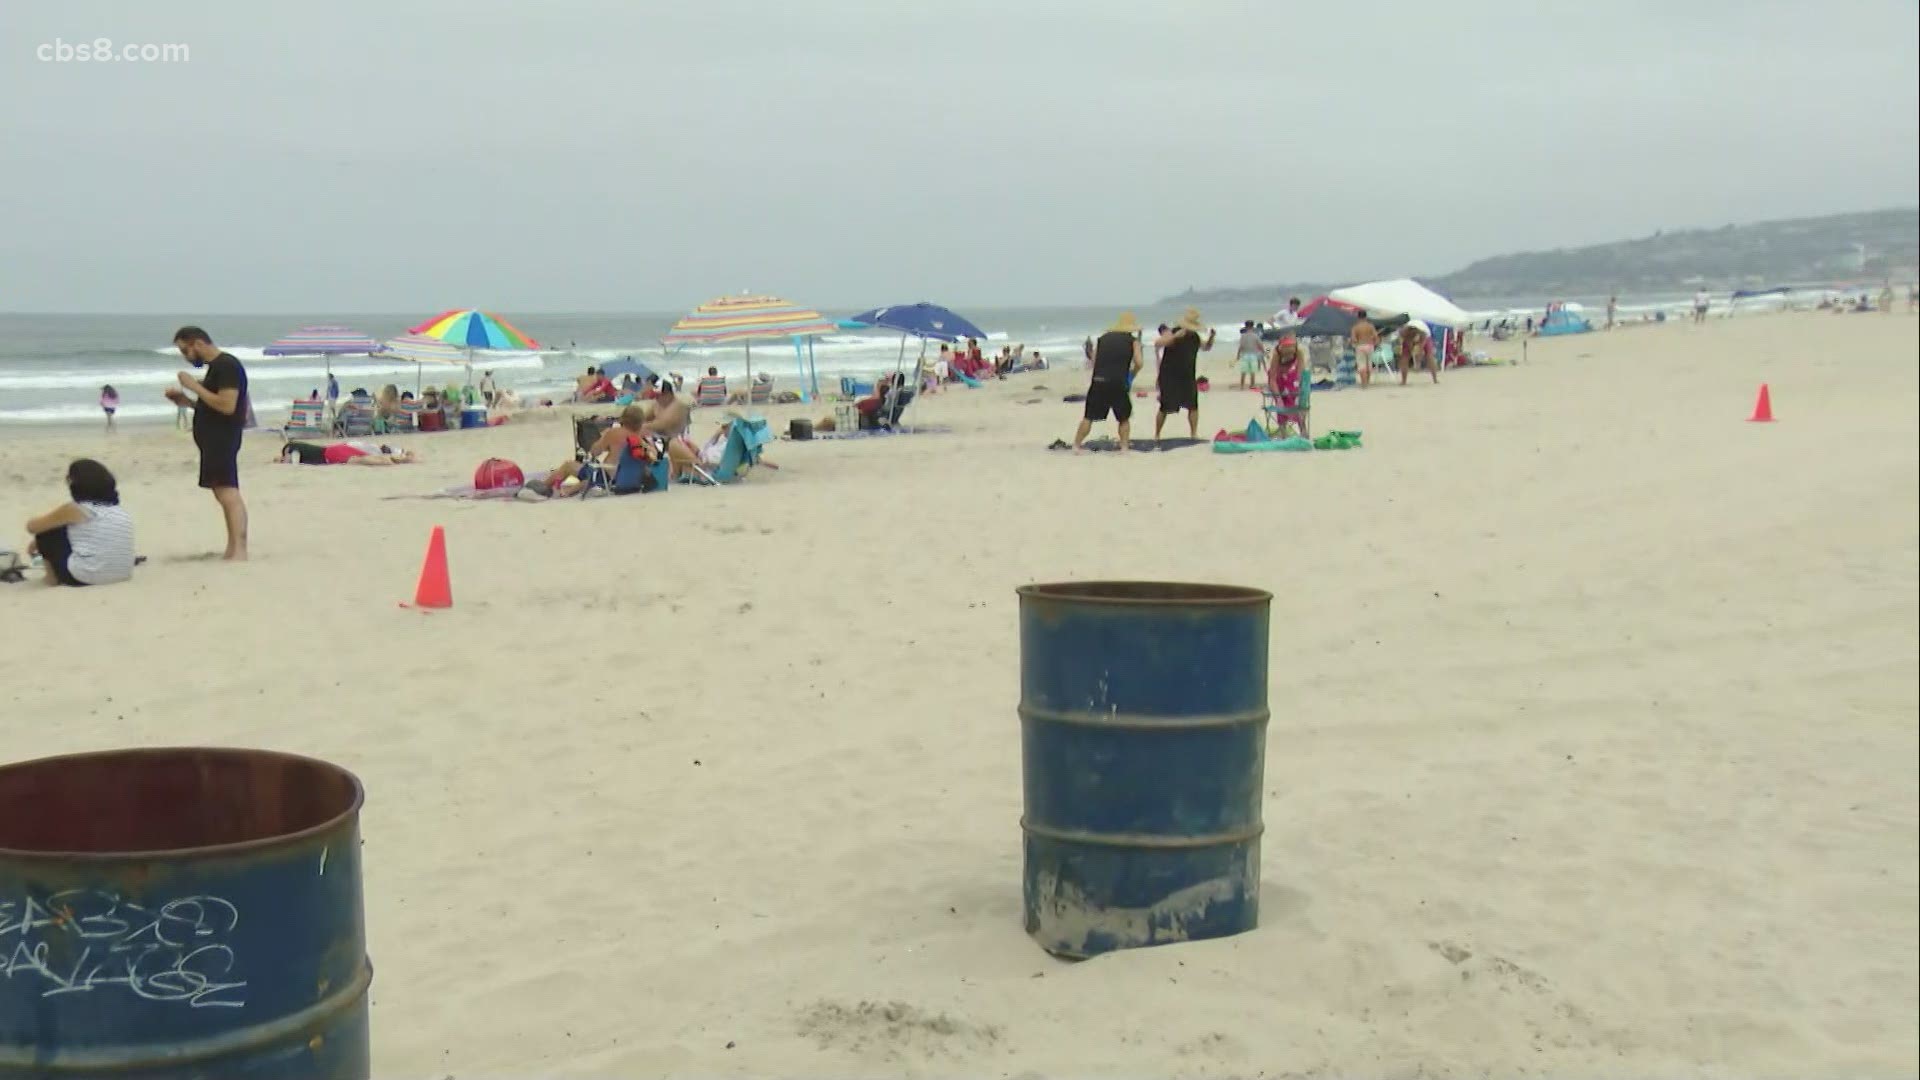 The Surfrider Foundation hosted a post-Independence Day cleanup effort Monday at beaches across San Diego County.